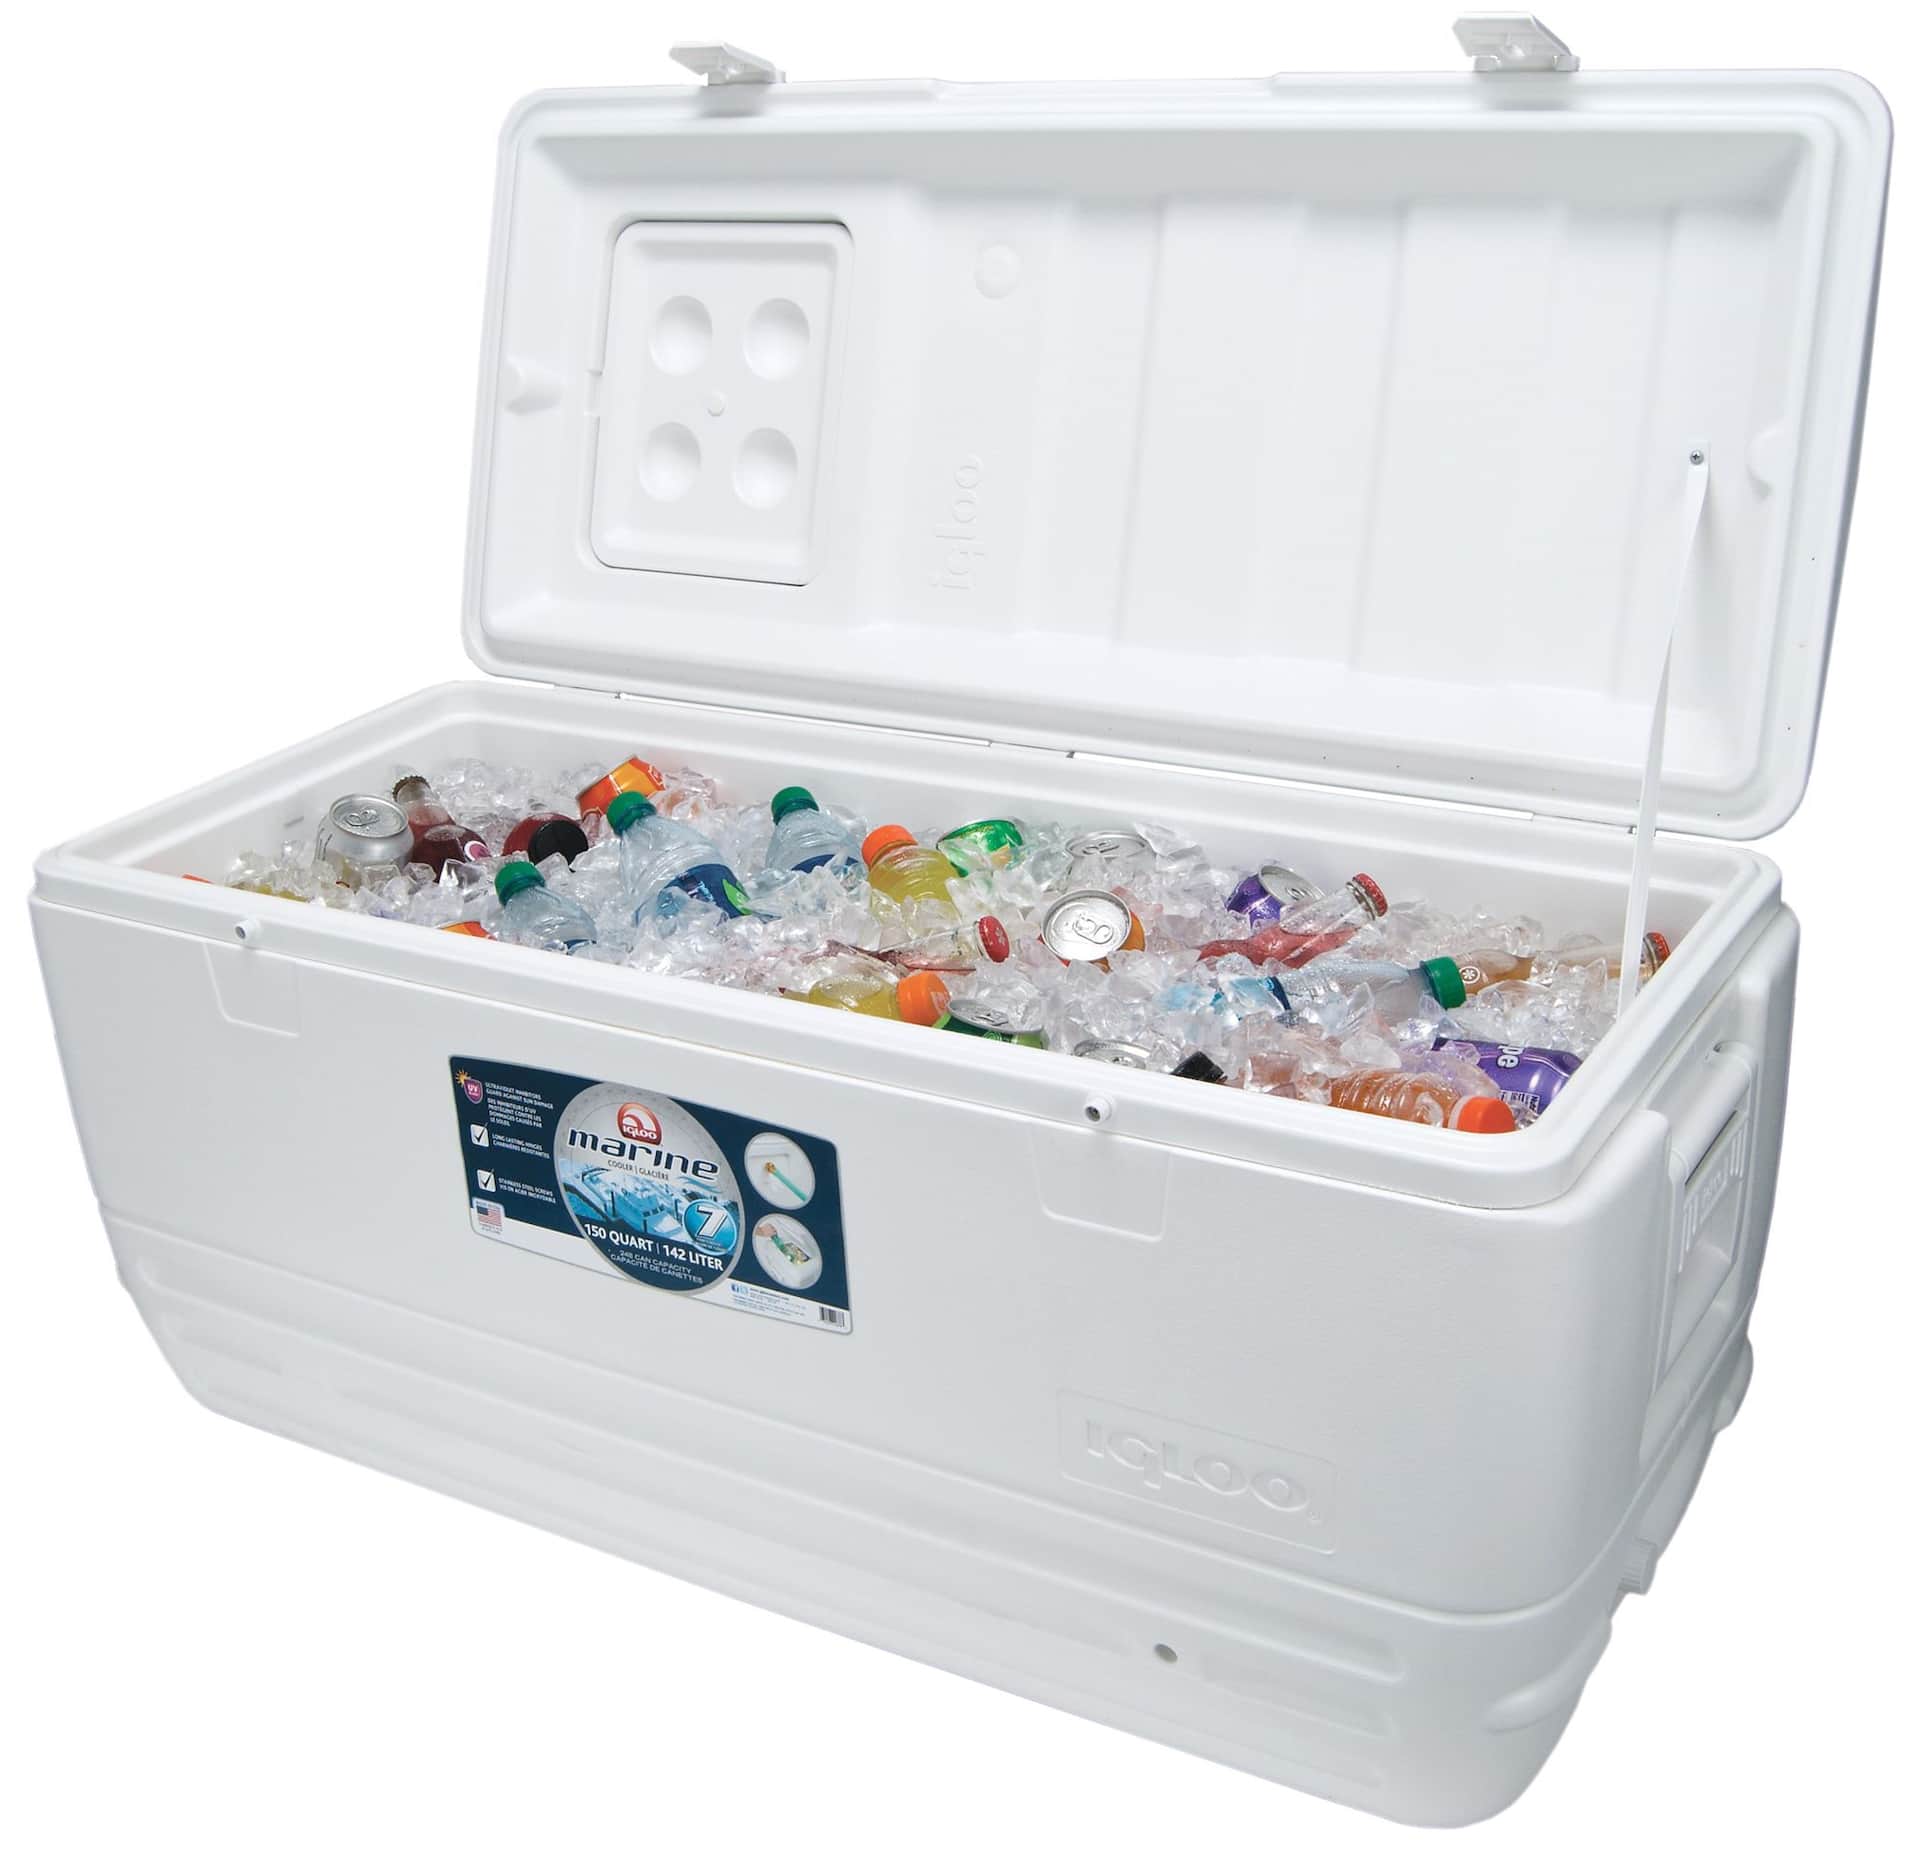 https://media-www.canadiantire.ca/product/playing/camping/hydration-coolers/0853496/150qt-marine-cooler-5c3bf0ac-4b87-4208-bcfd-d6973991d507-jpgrendition.jpg